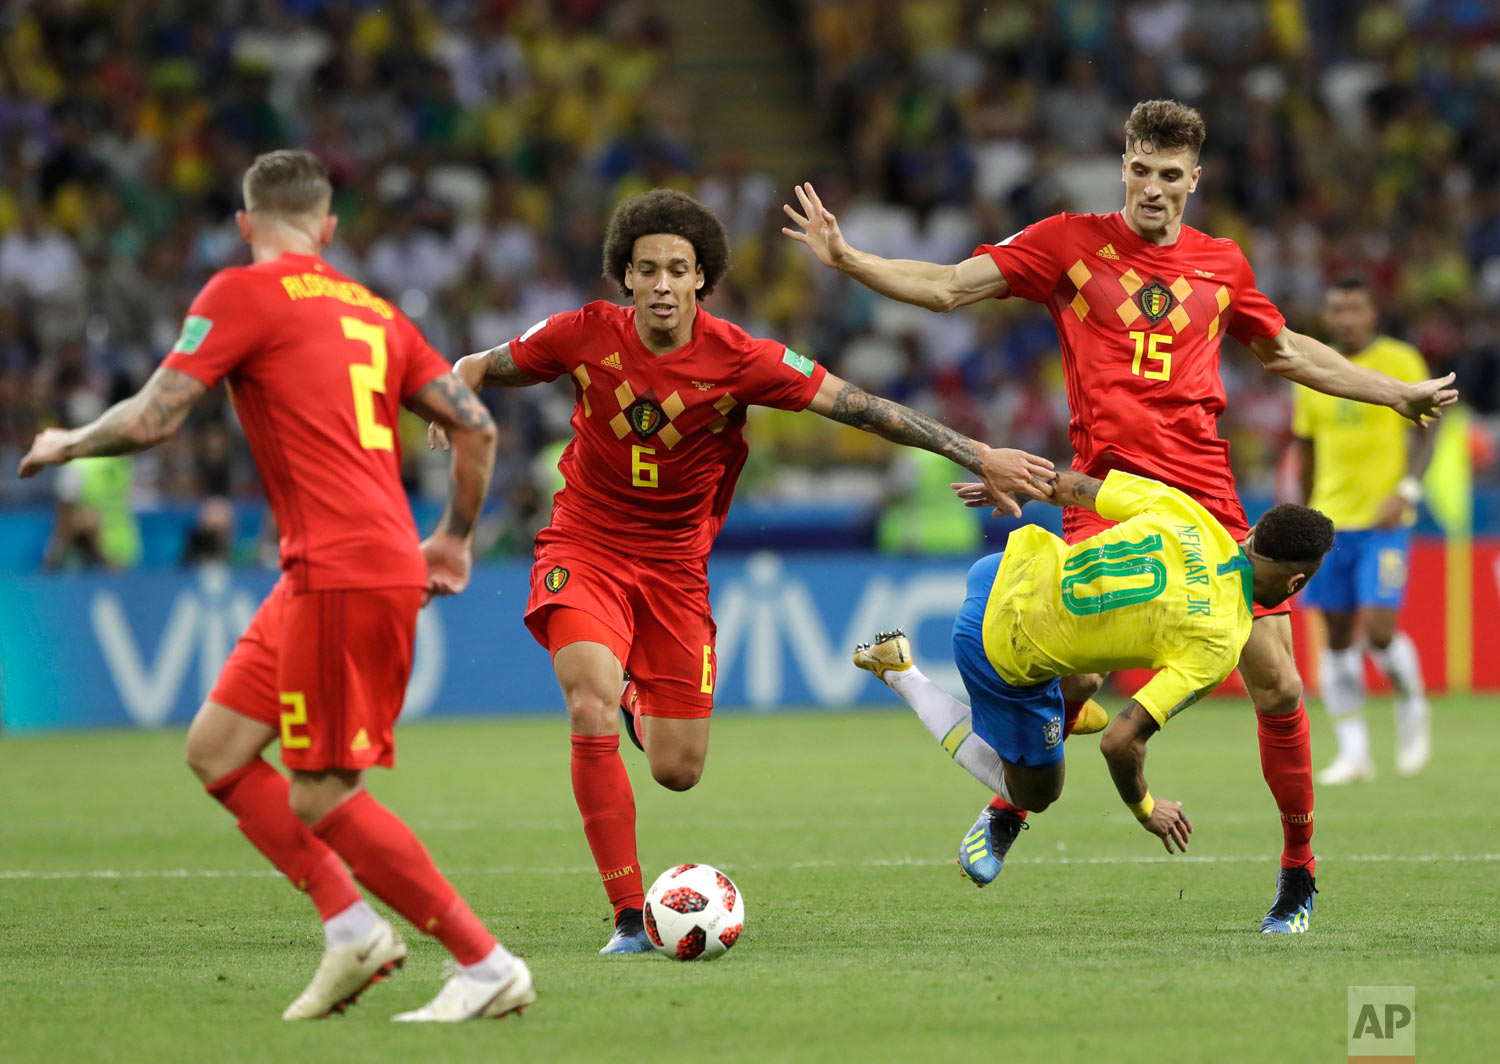  Brazil's Neymar takes a fall while battling Belgium's Axel Witsel, center, and Thomas Meunier, right, during the quarterfinal match between Brazil and Belgium at the 2018 soccer World Cup in the Kazan Arena, in Kazan, Russia, Friday, July 6, 2018. (